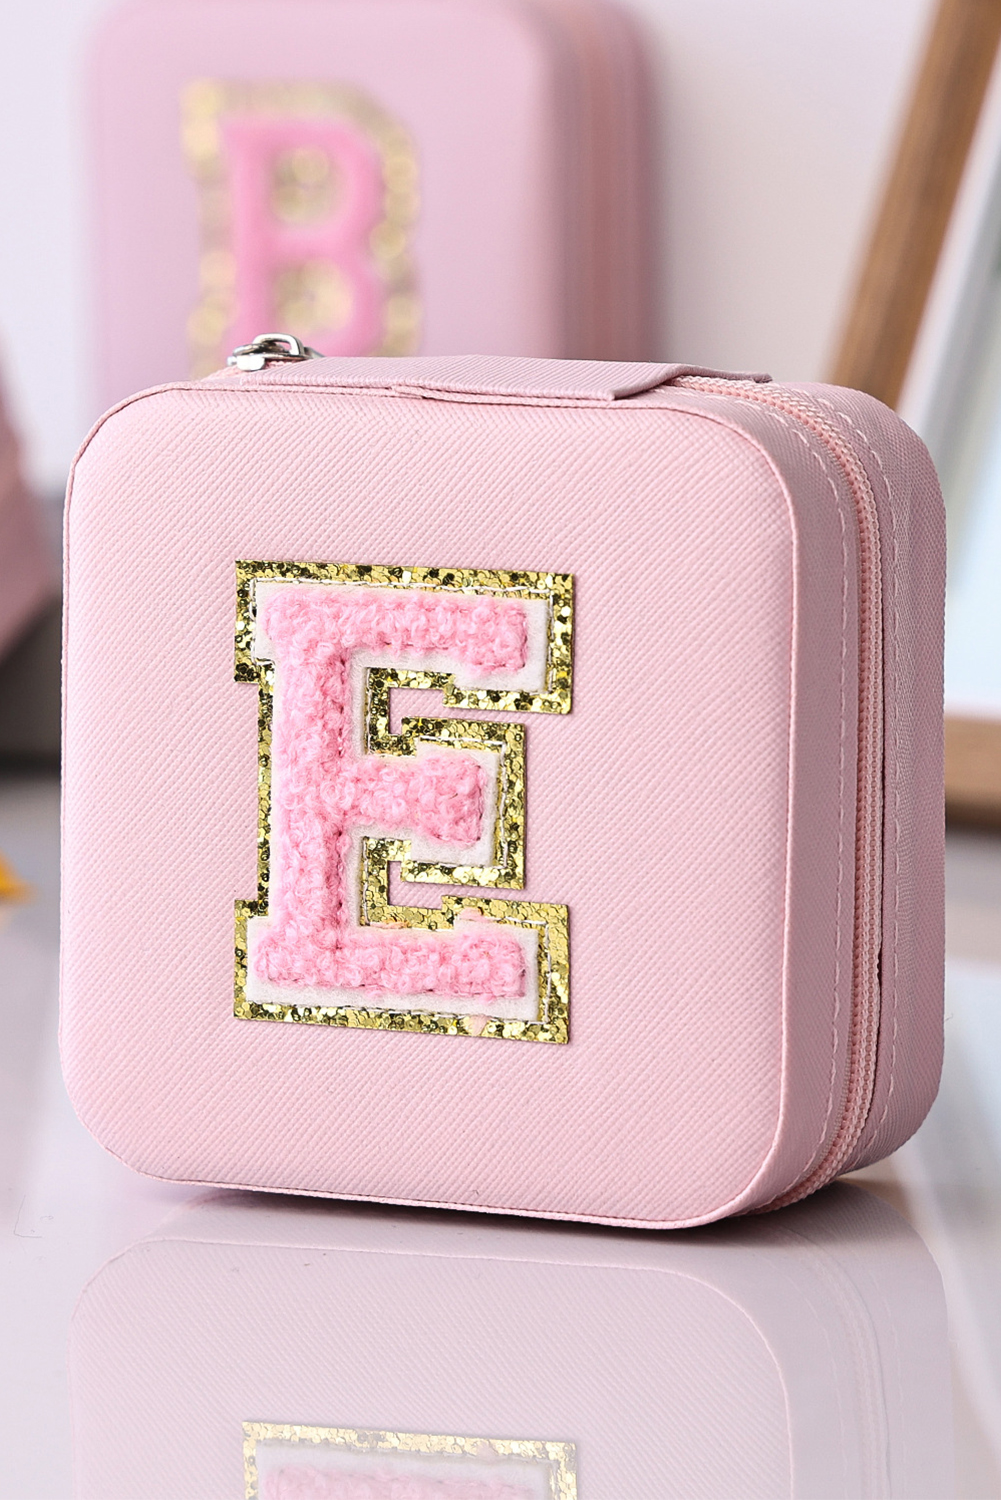 Shewin Wholesale Distributor Pink Letter E Chenille Patch Layered JEWELRY Box